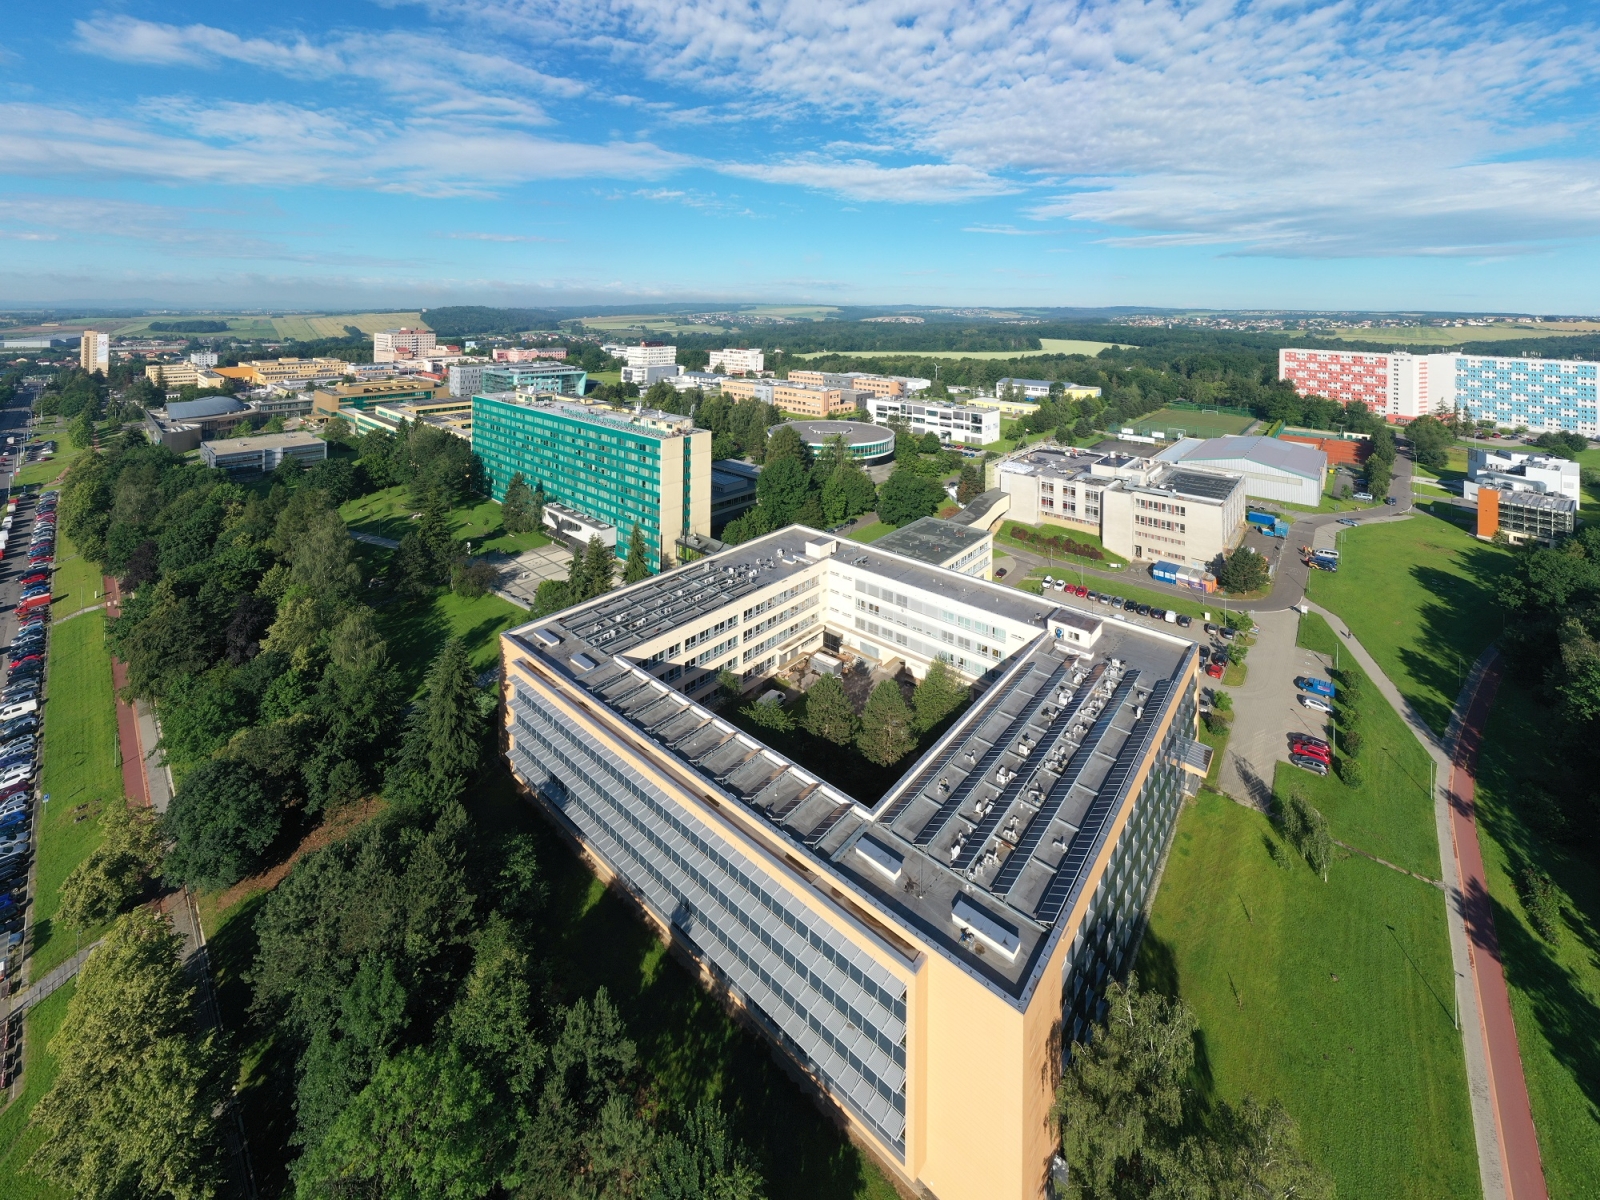 The inauguration of the “Fraunhofer Innovation Platform for Applied Artificial Intelligence for Materials & Manufacturing at VSB – Technical University of Ostrava” took place on June 8, 2021 at the VSB-TUO campus in Ostrava.